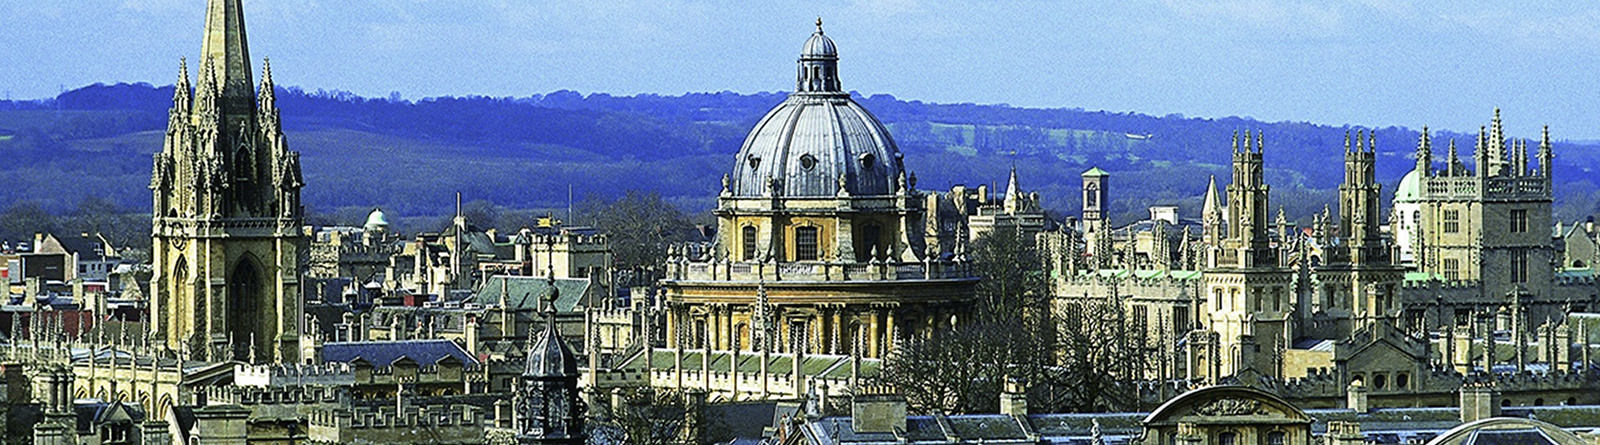 Image Of Oxford